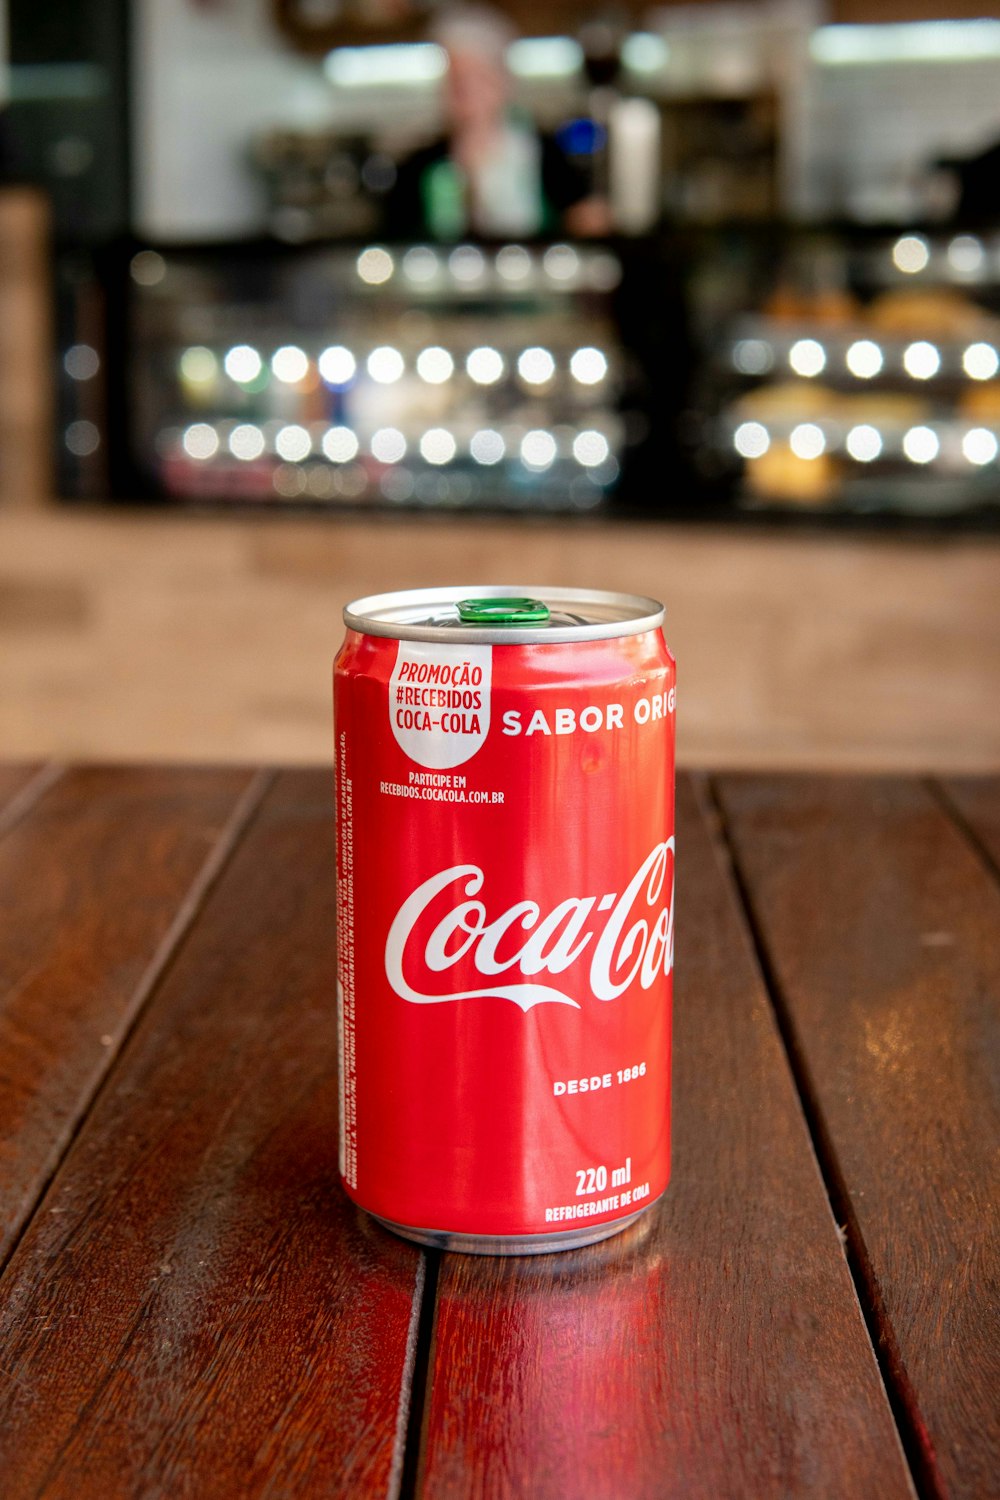 Coca-Cola soda can on brown table